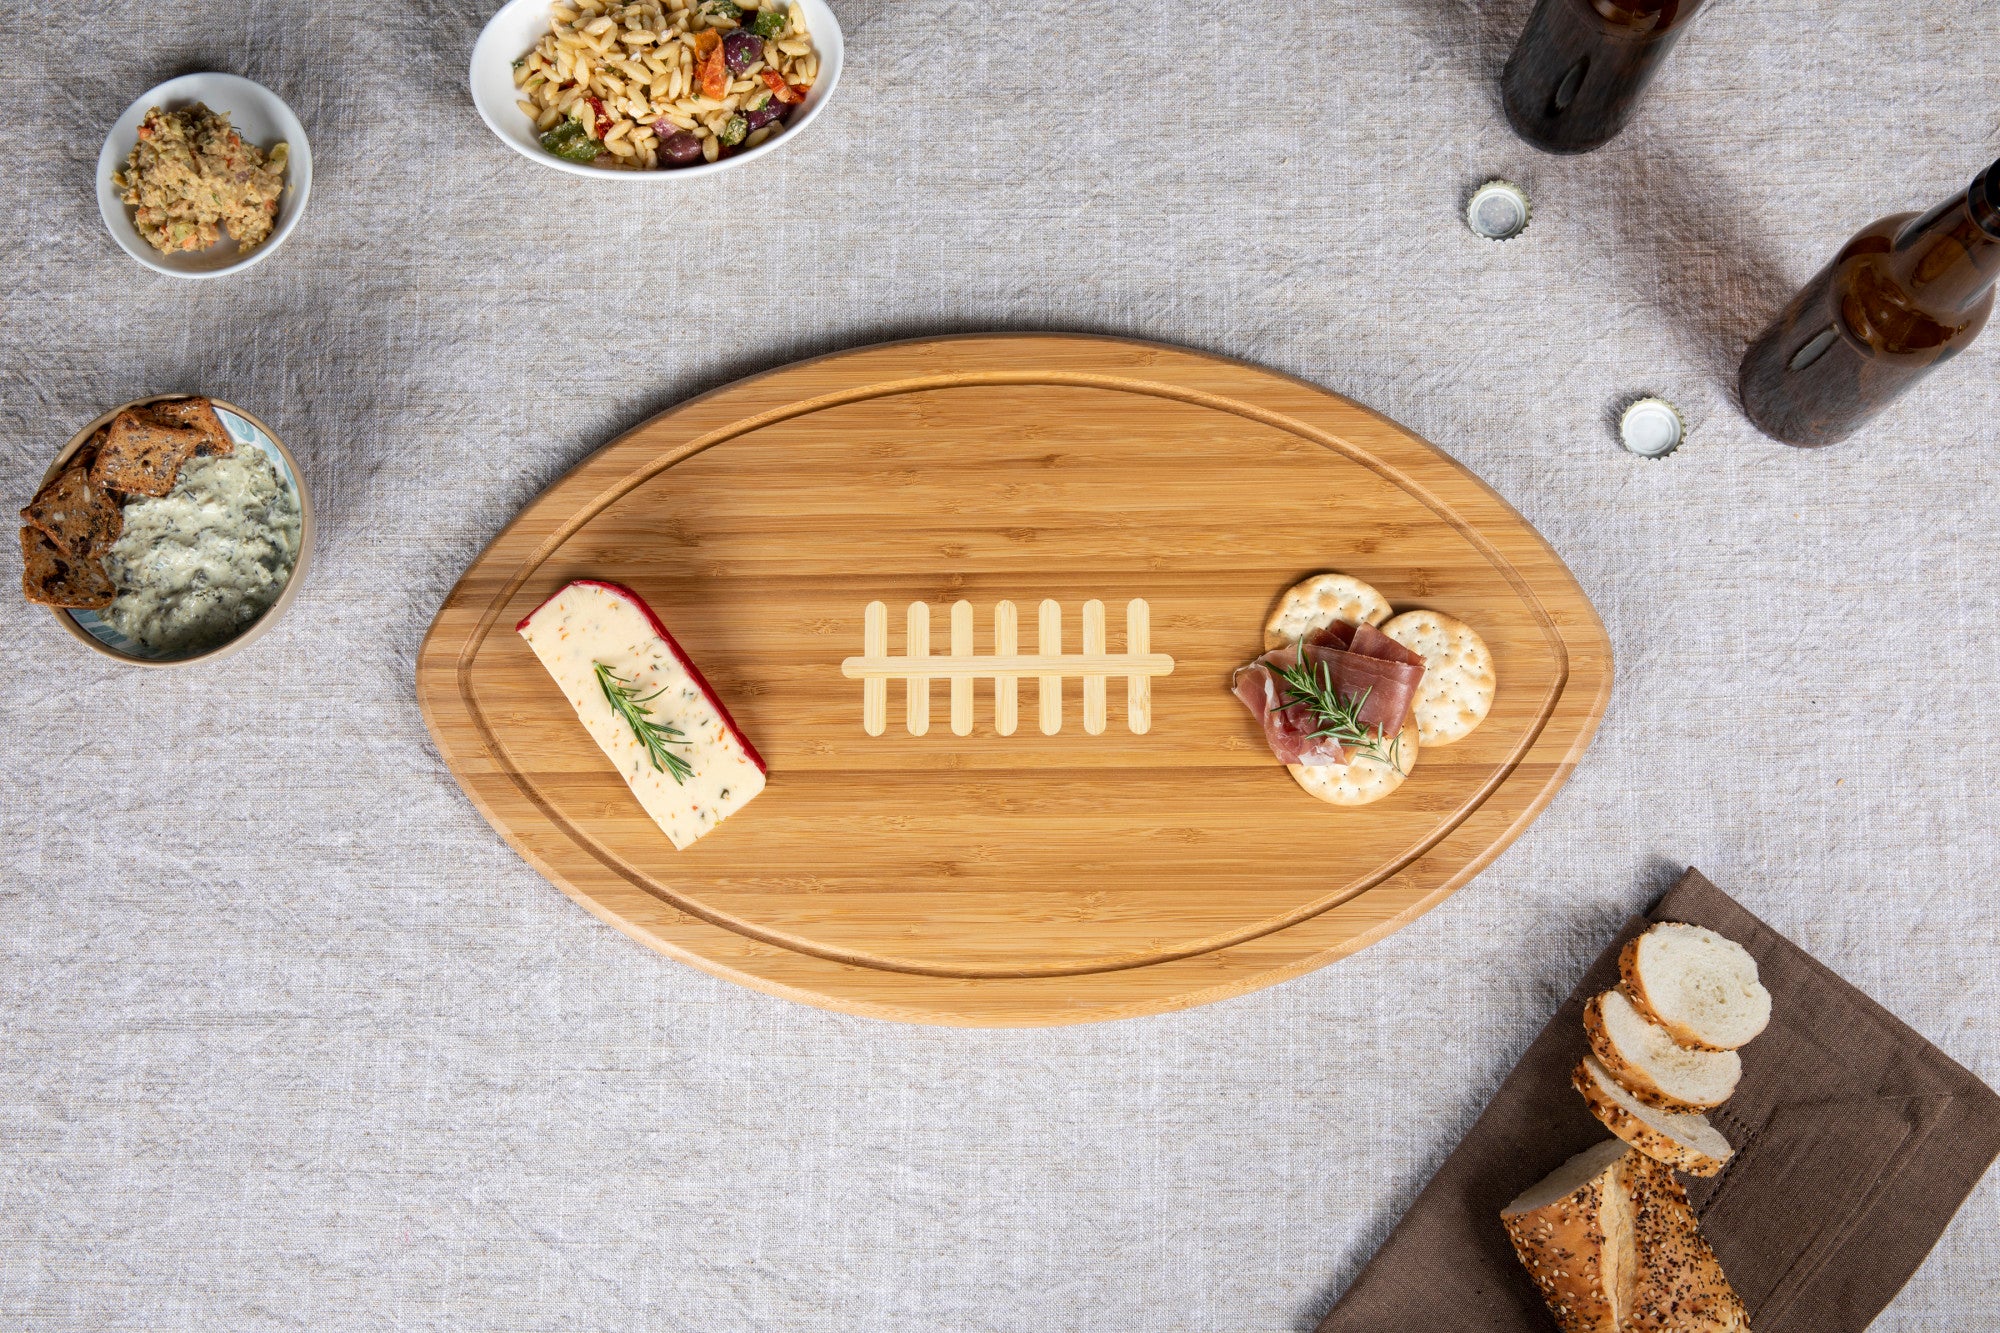 Cornell Big Red - Kickoff Football Cutting Board & Serving Tray